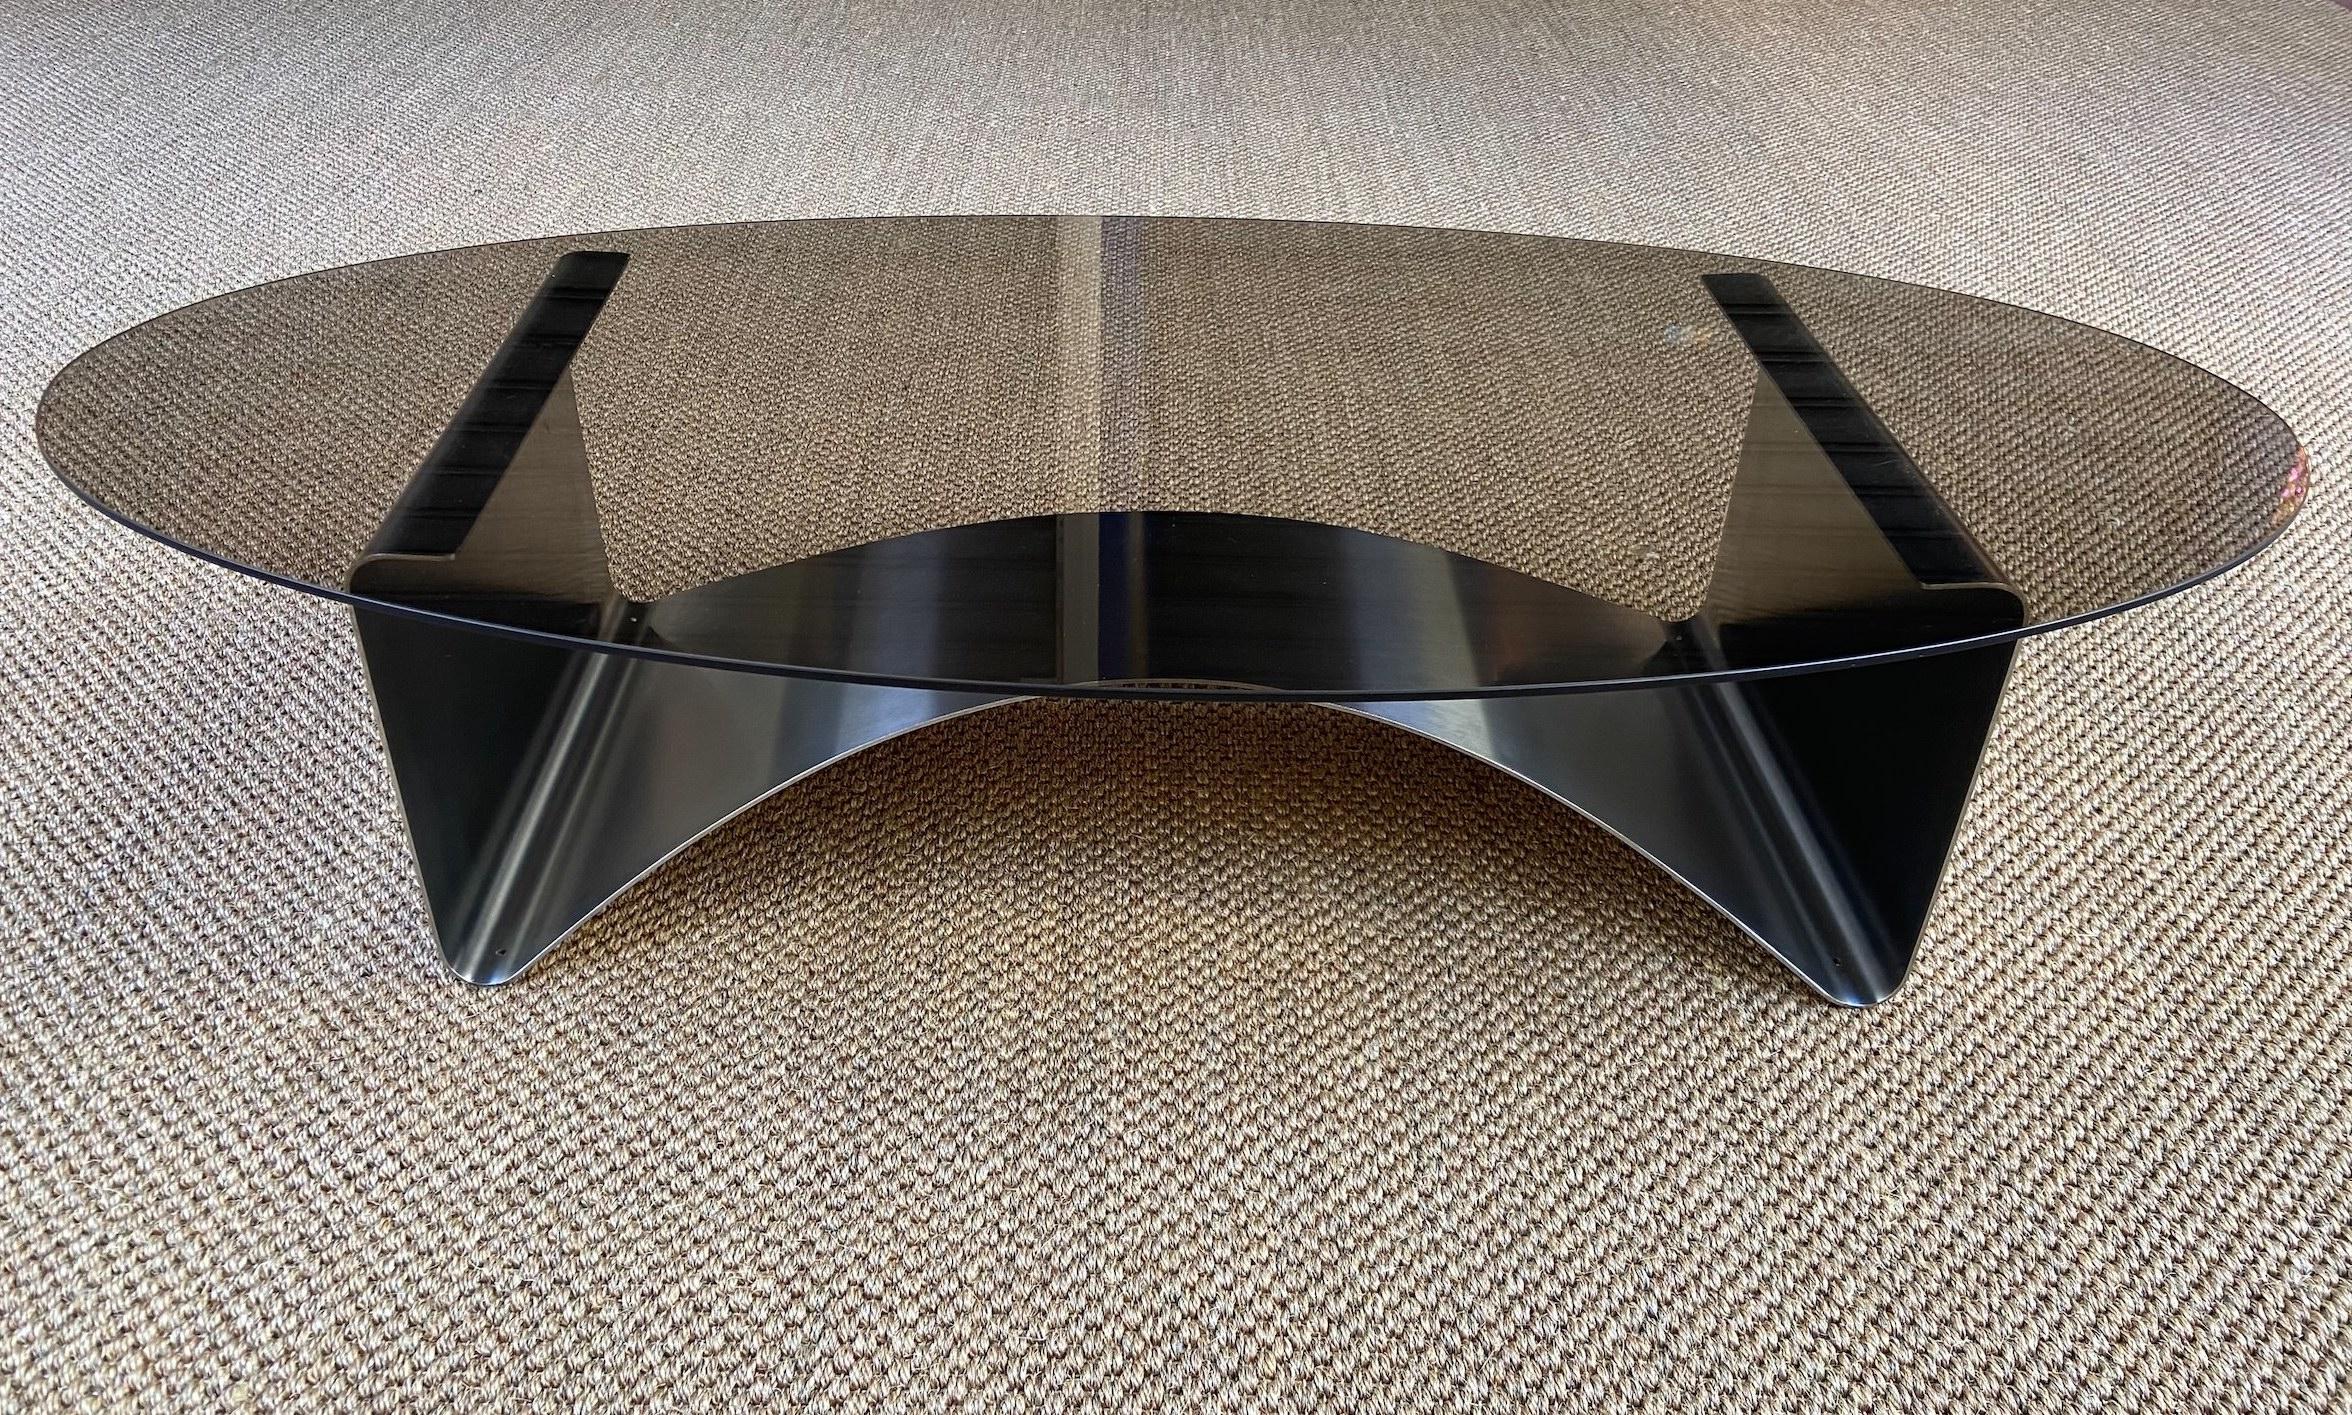 Francois Monnet - oval coffee table
1975
Smoked Glass and steel
Measures: H 28 x L 125 x P 60 cm.

 